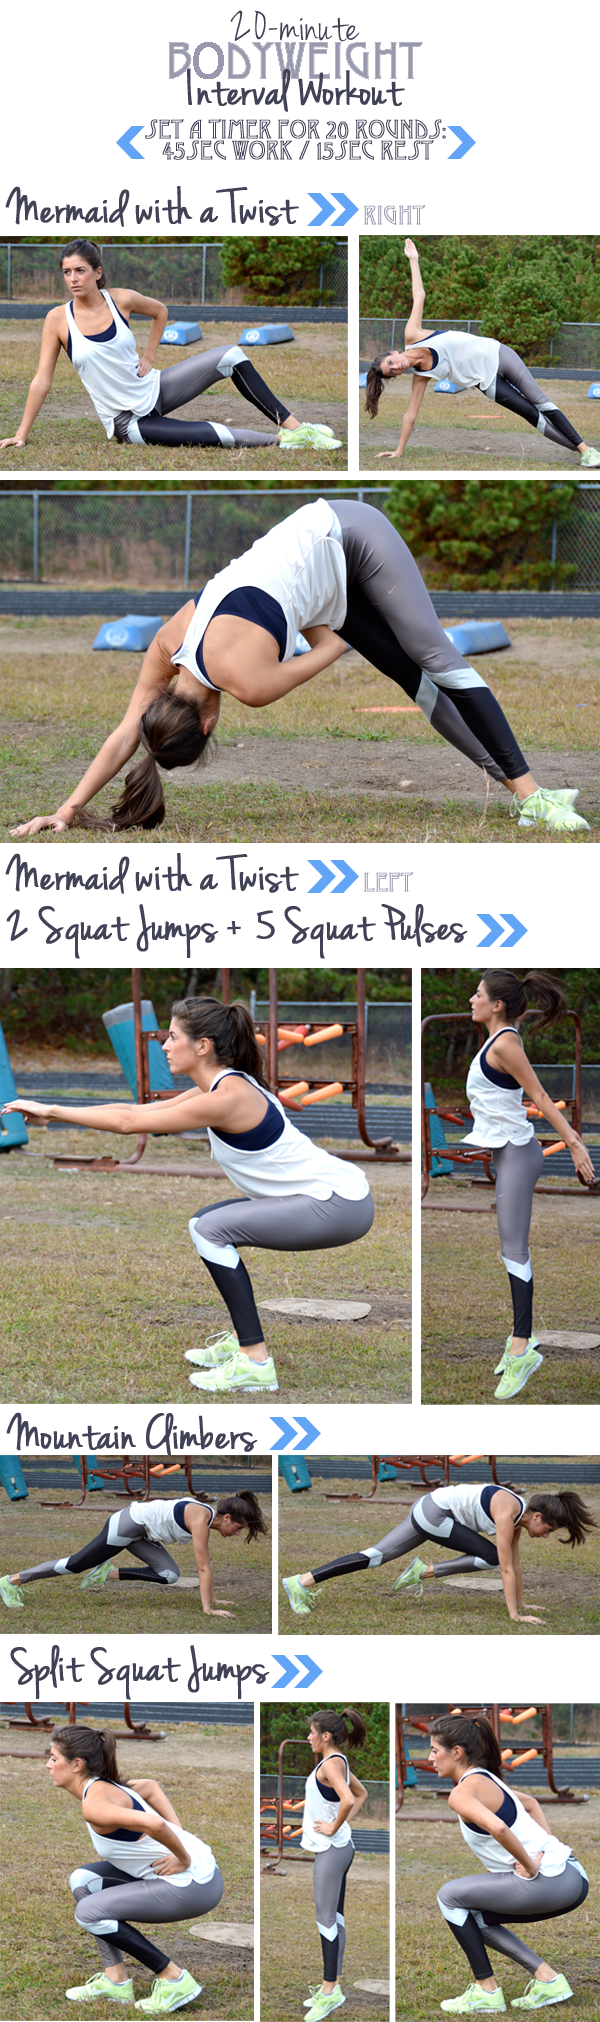 20-Minute Bodyweight Interval Workout